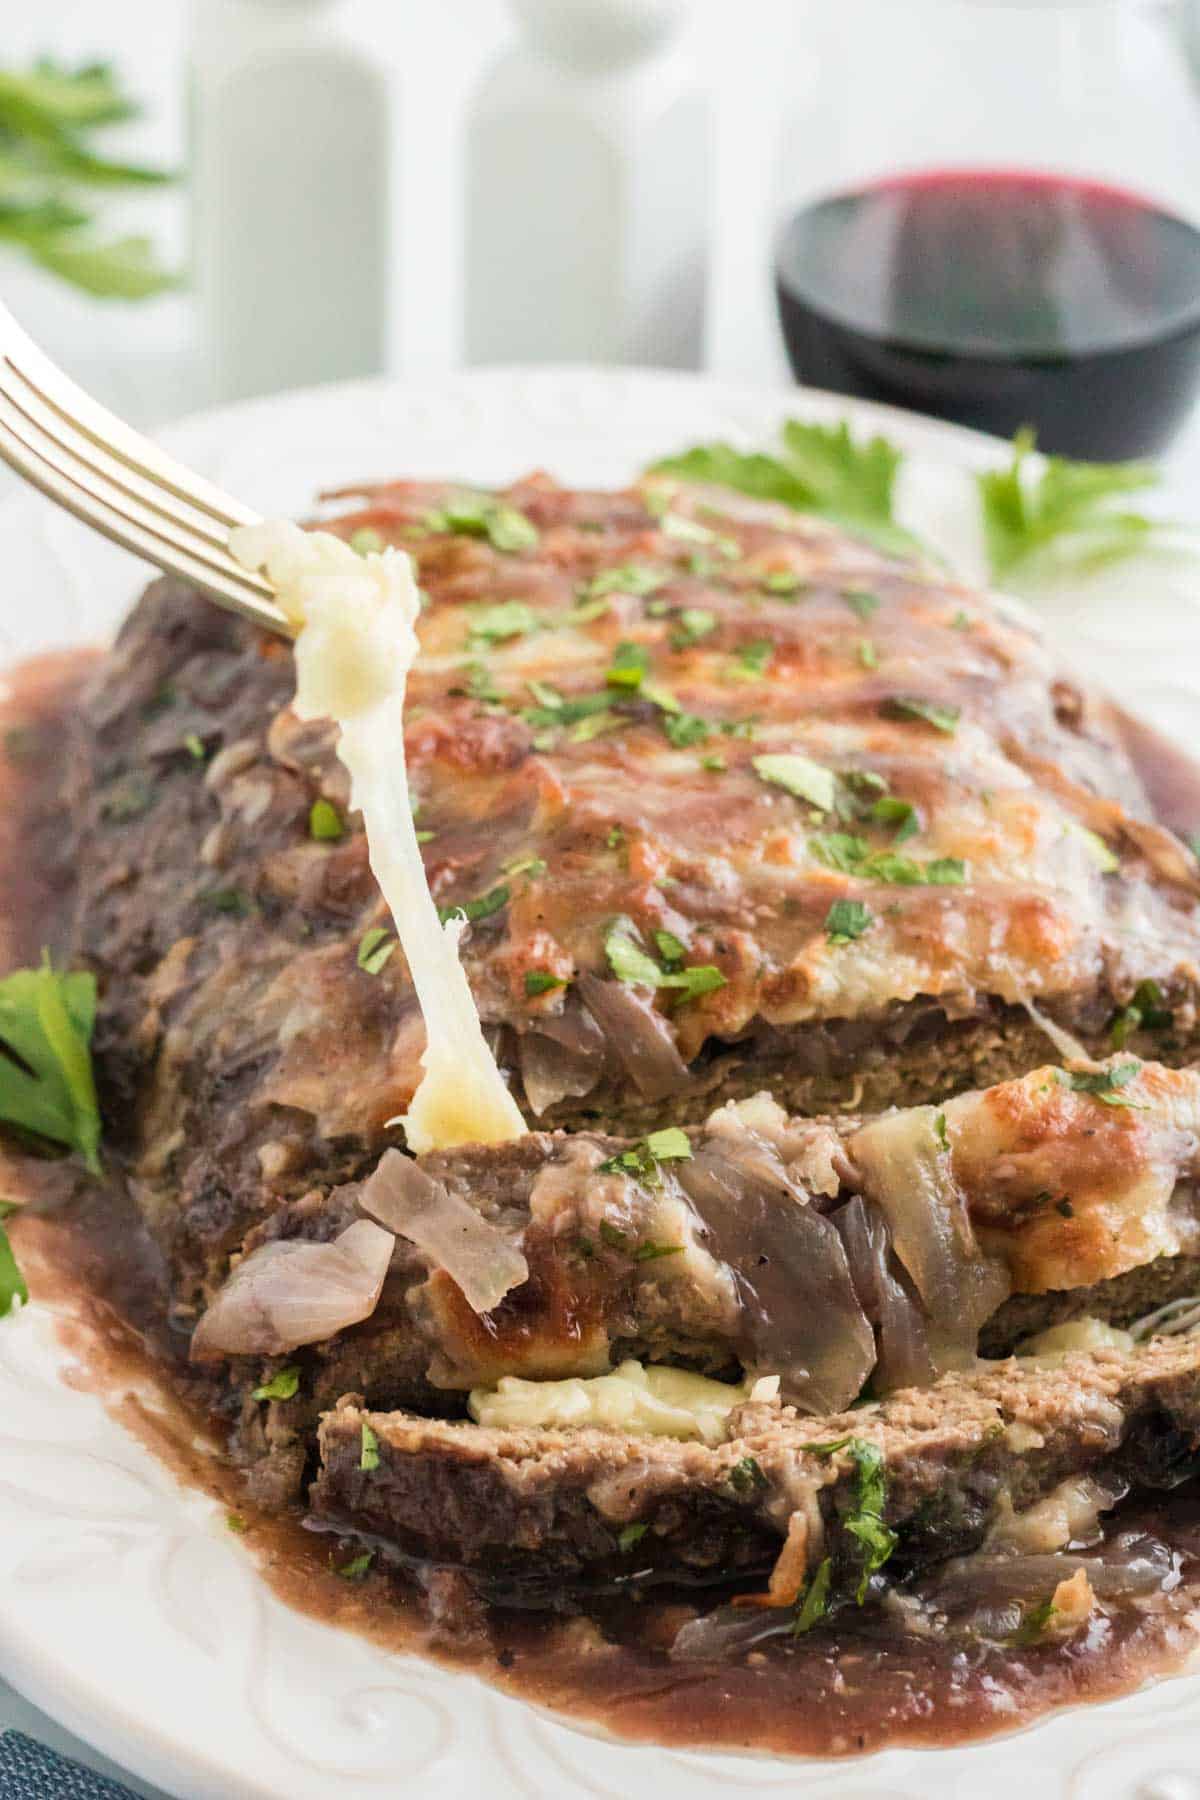 Mozzarella stuffed meatloaf on a serving platter with two slices cut off and a glass of wine in the background